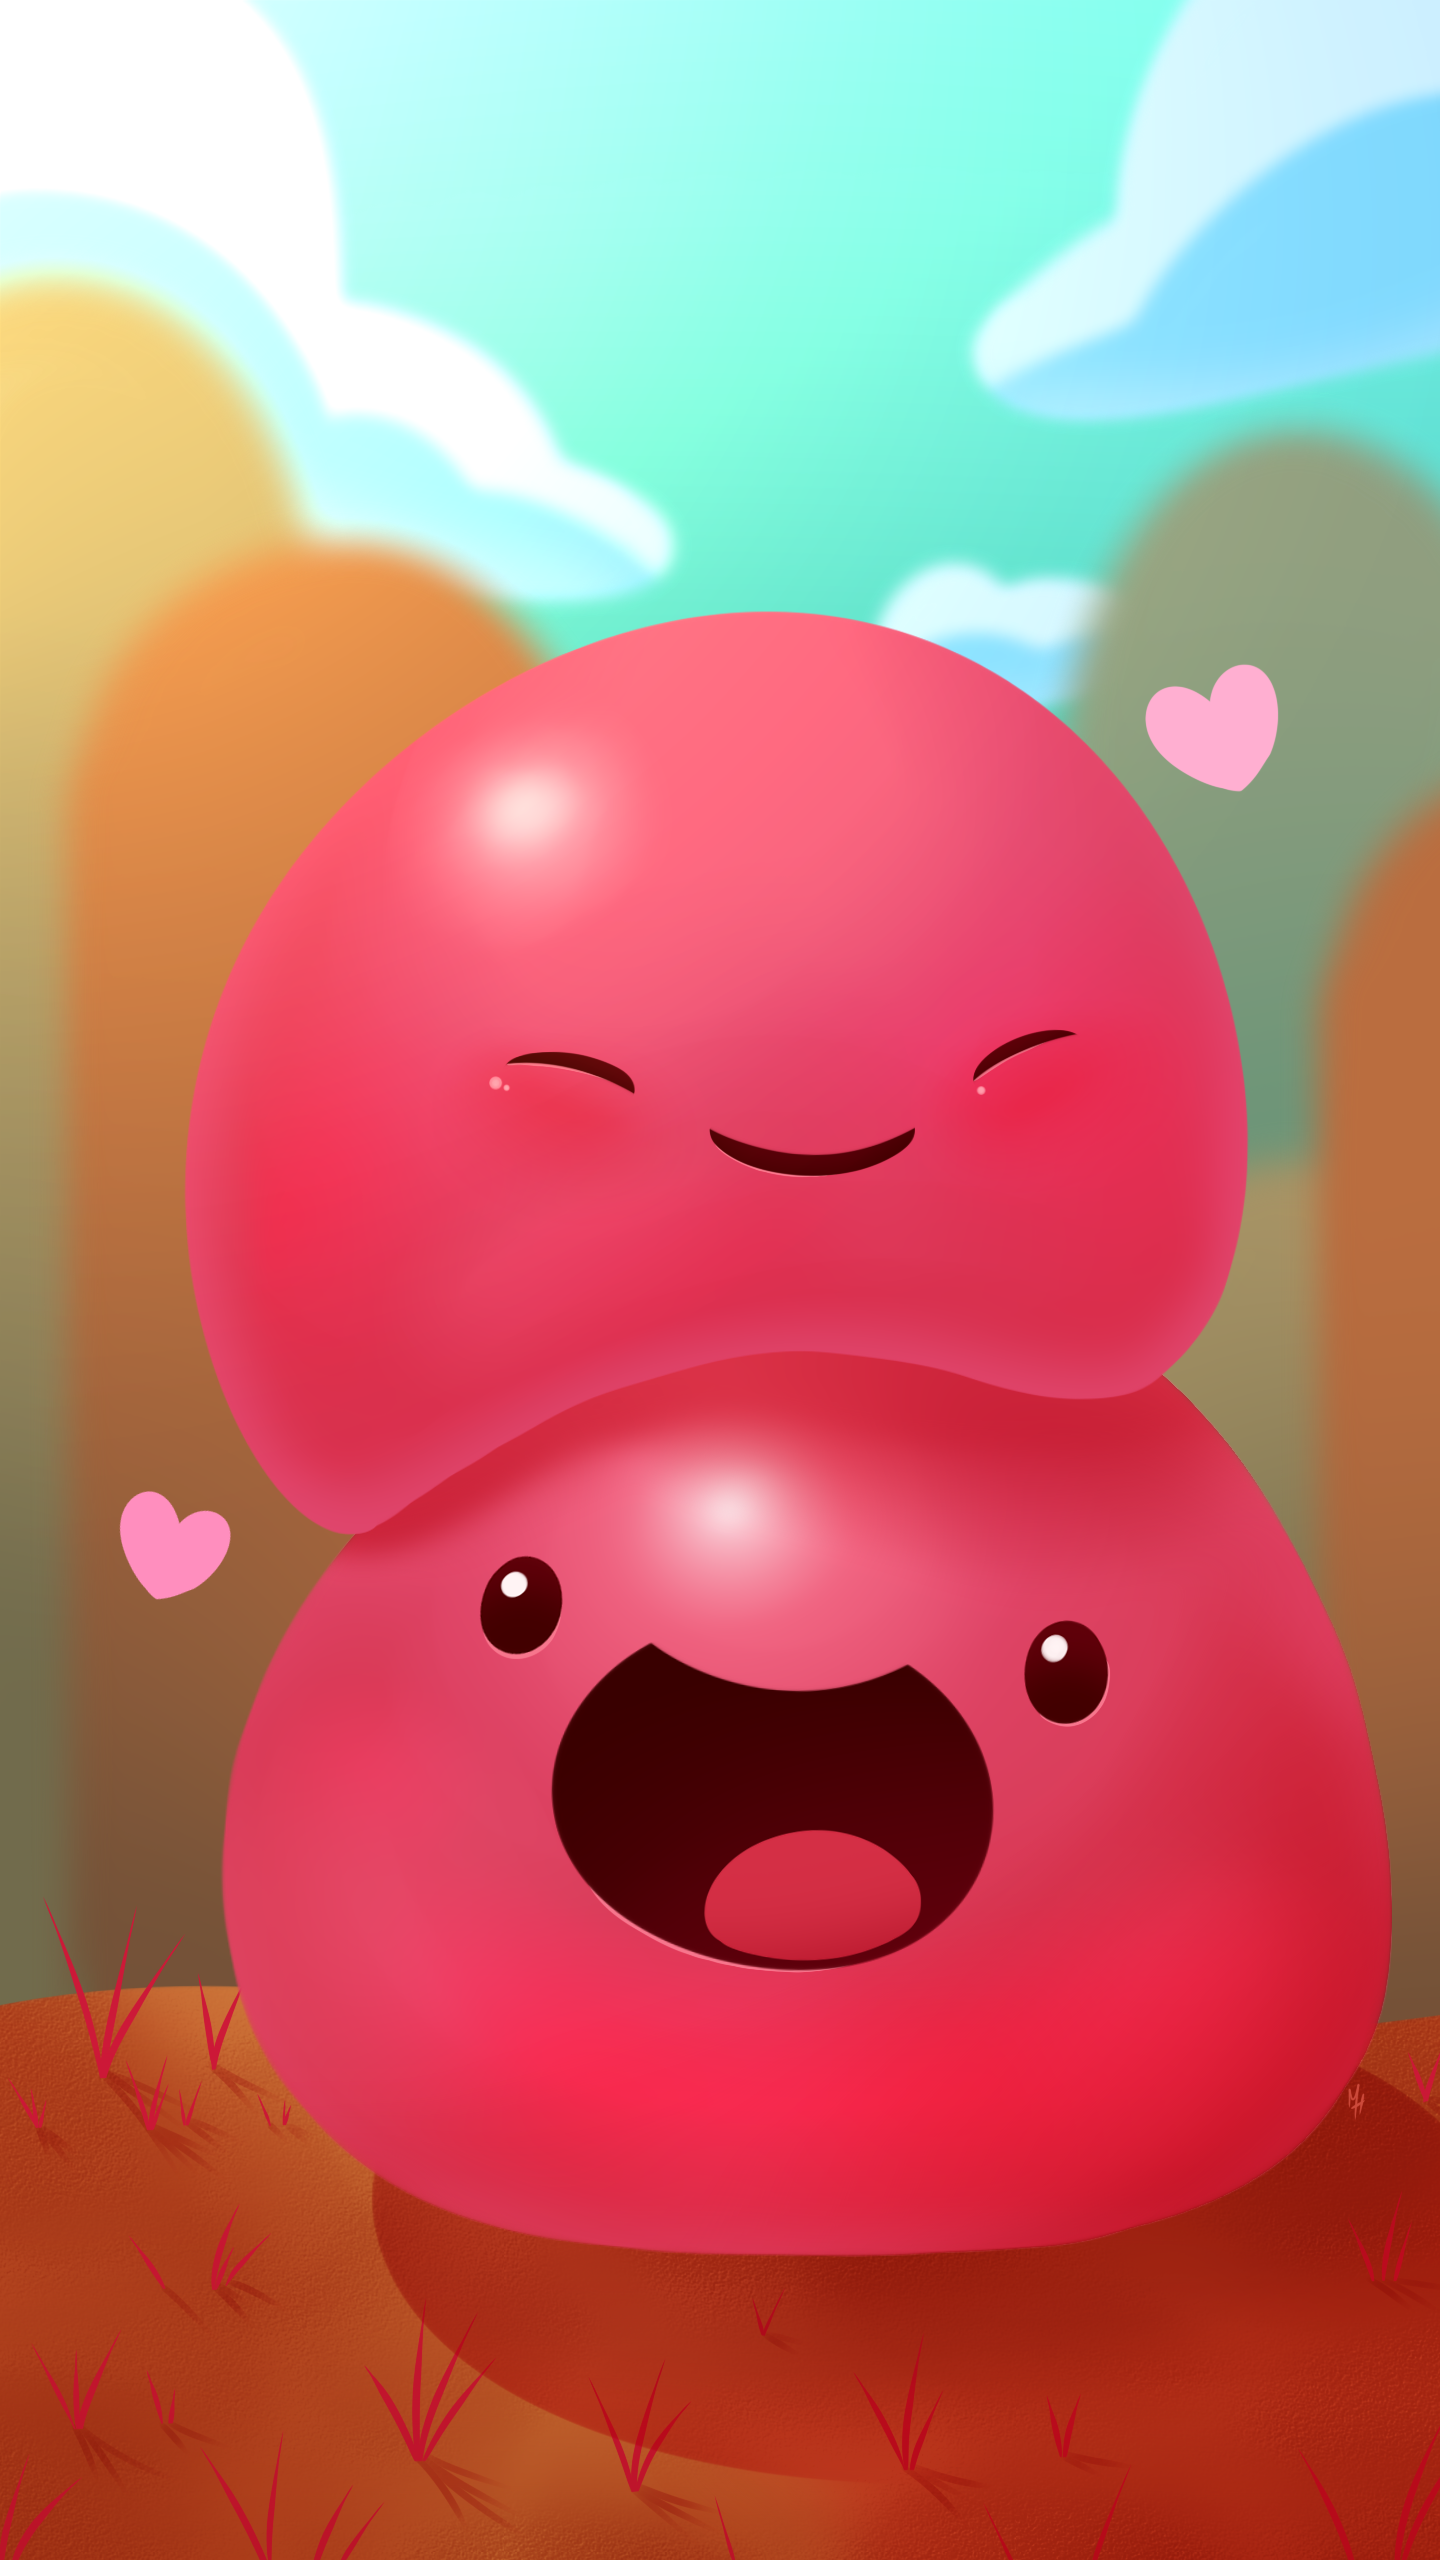 Pink Slime Friends! 2K Resolution Phone Wallpaper (Made by me)